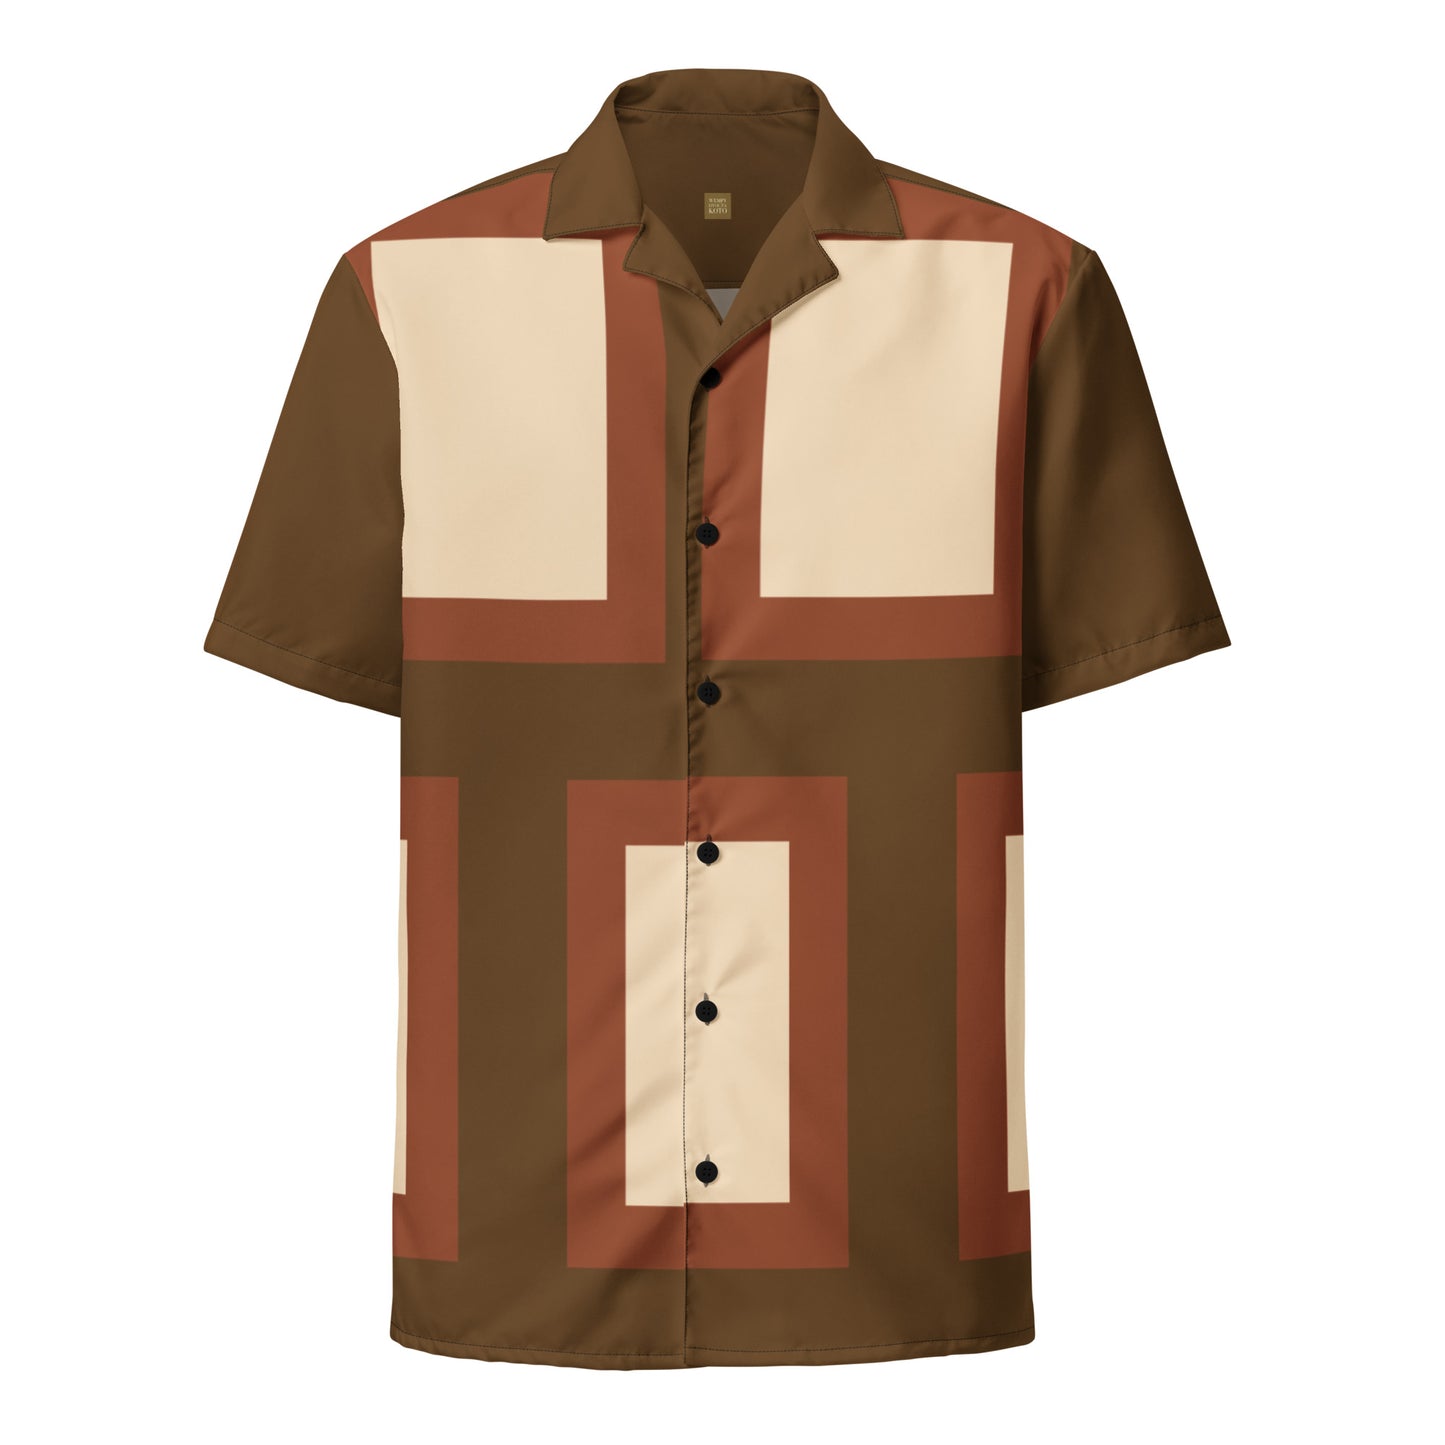 Retro Block - Inspired By Harry Styles - Sustainably Made Unisex button shirt